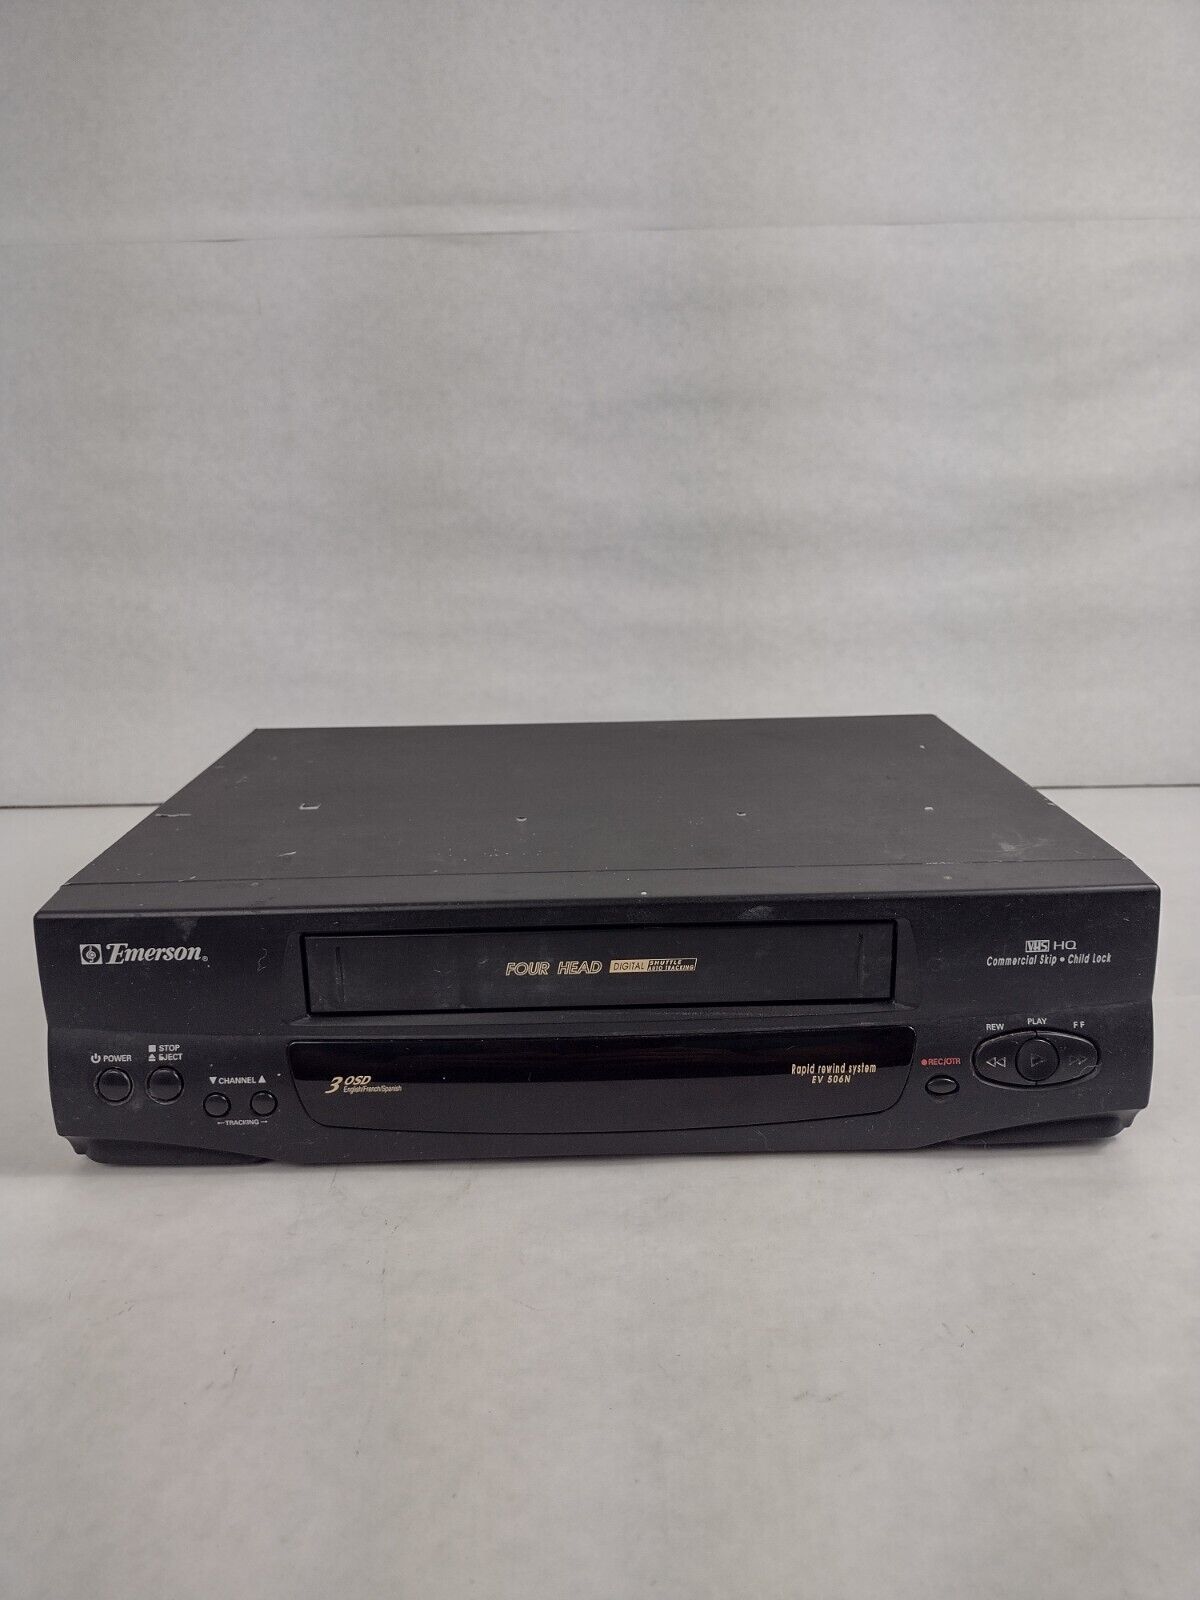 Emerson EV506N VCR VHS Recorder Player NO REMOTE Tested Works